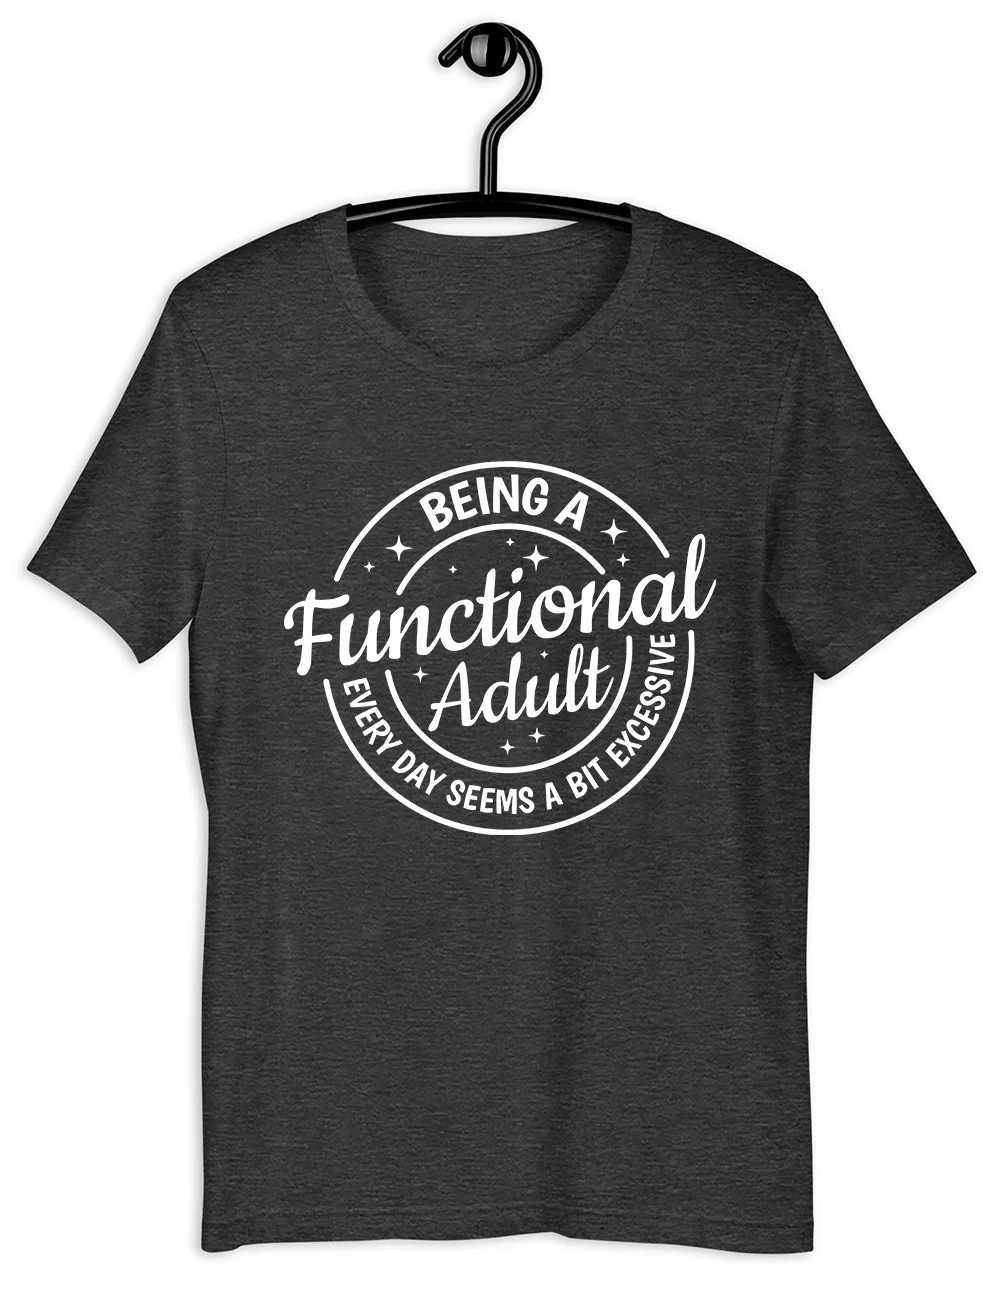 Being A Functional Adult Everyday Seems A Bit Excessive T-Shirt